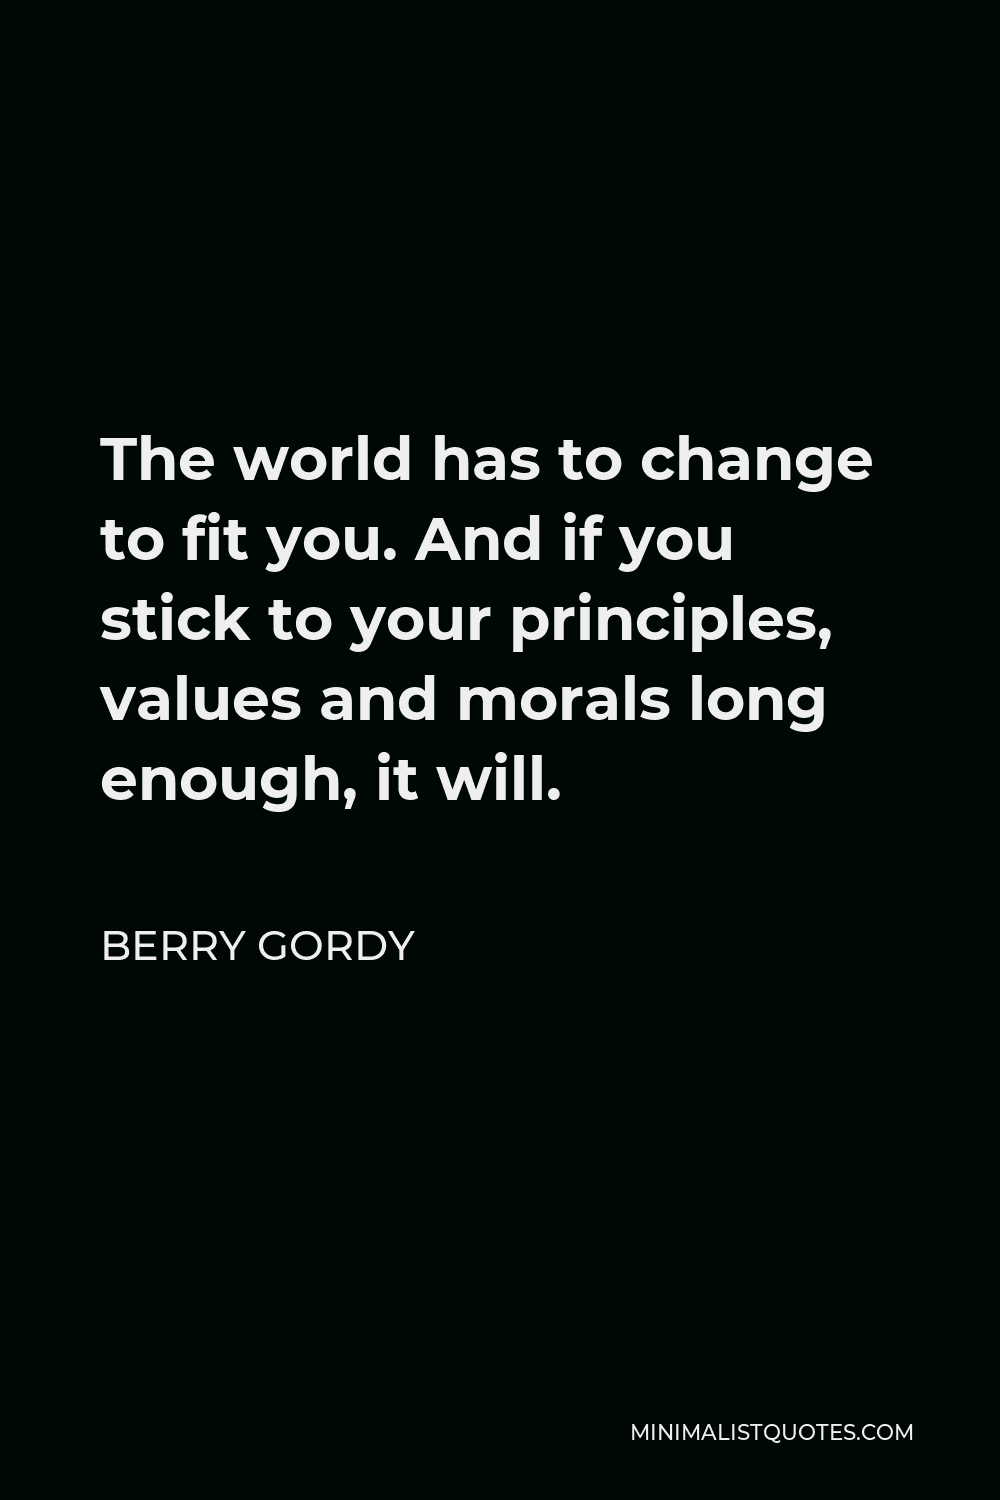 Berry Gordy Quote - The world has to change to fit you. And if you stick to your principles, values and morals long enough, it will.